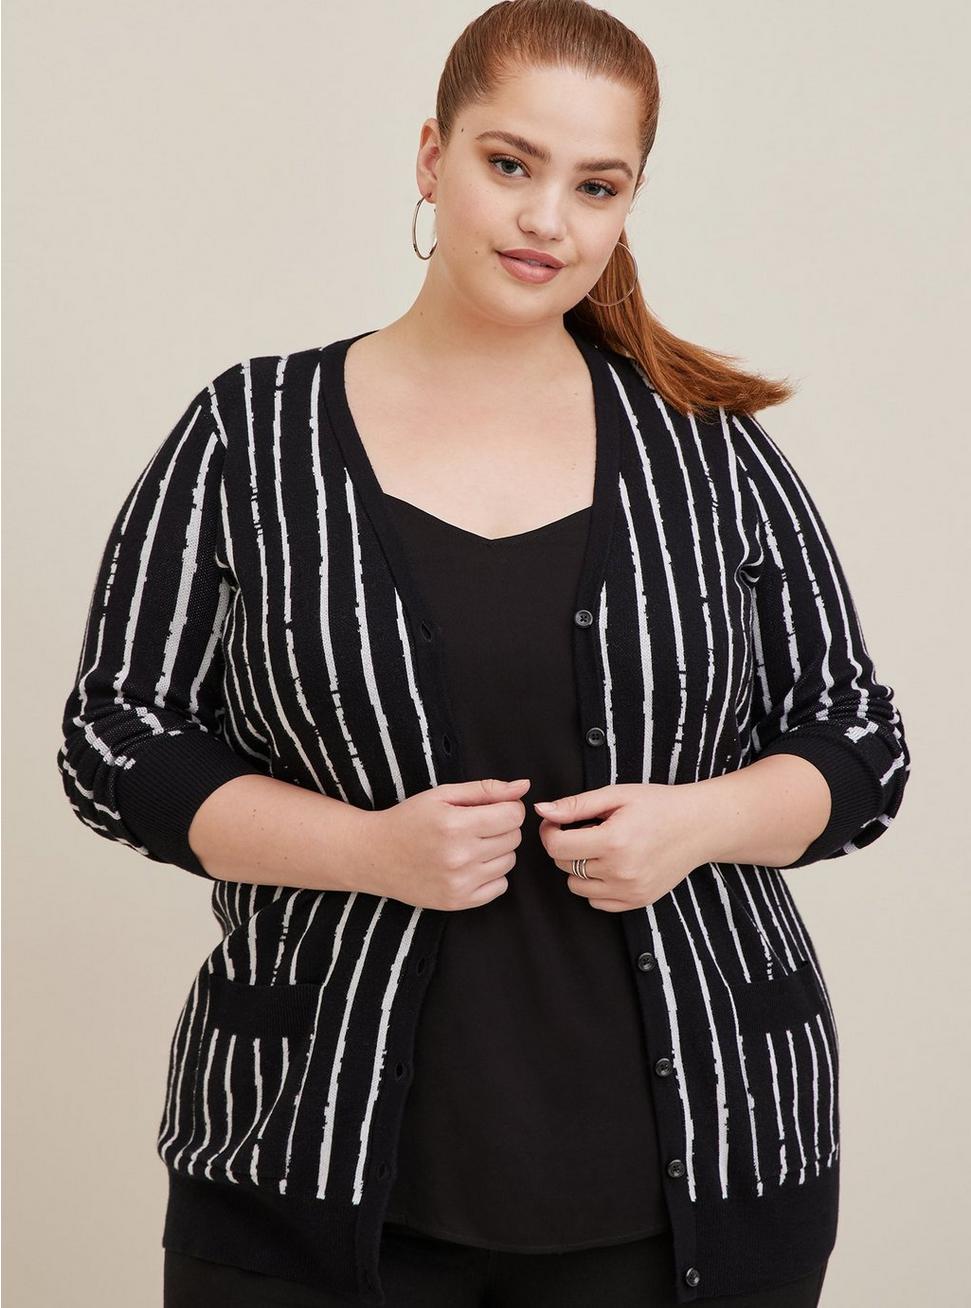 Plus Size - Disney Button Front Cardigan - Cotton The Nightmare